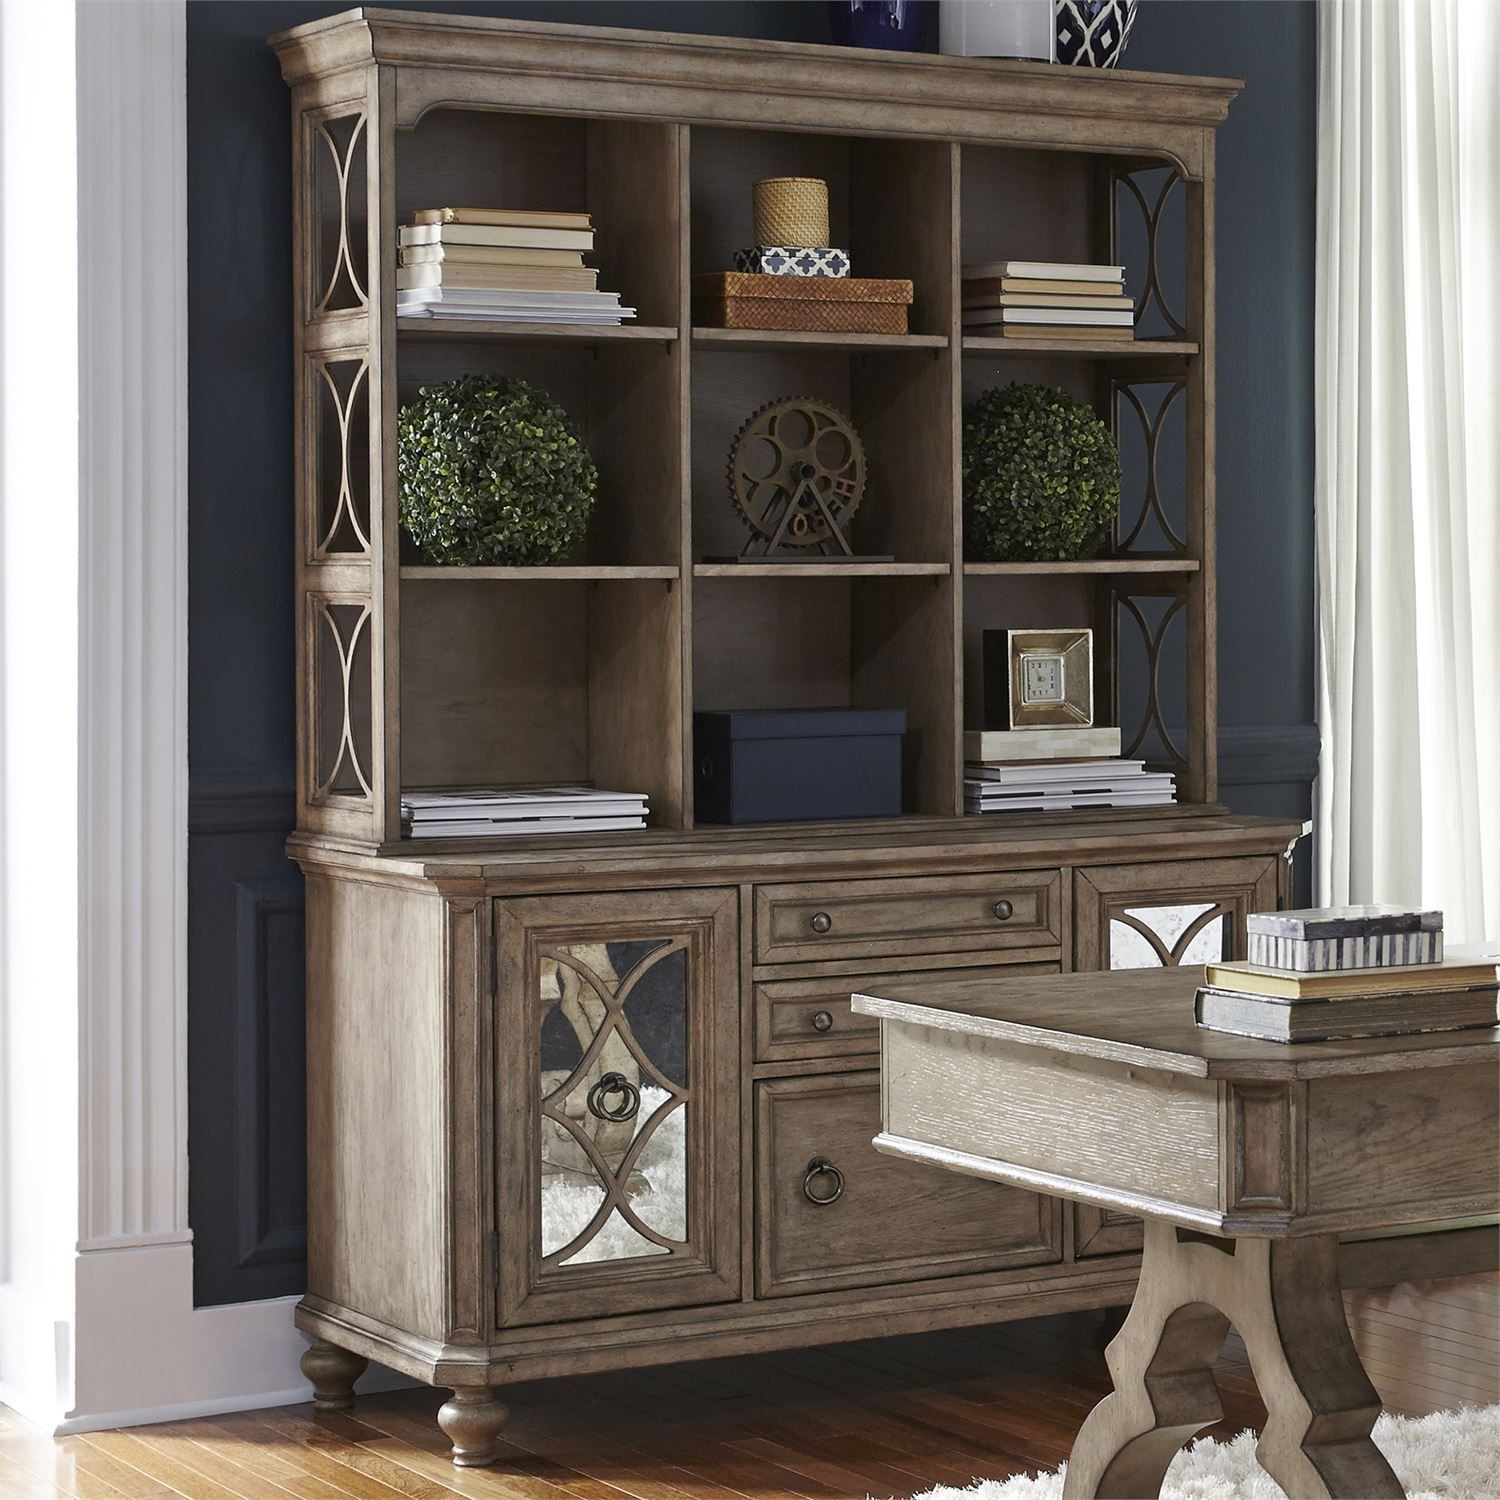 Simply Elegant Credenza & Hutch Set by Liberty Furniture